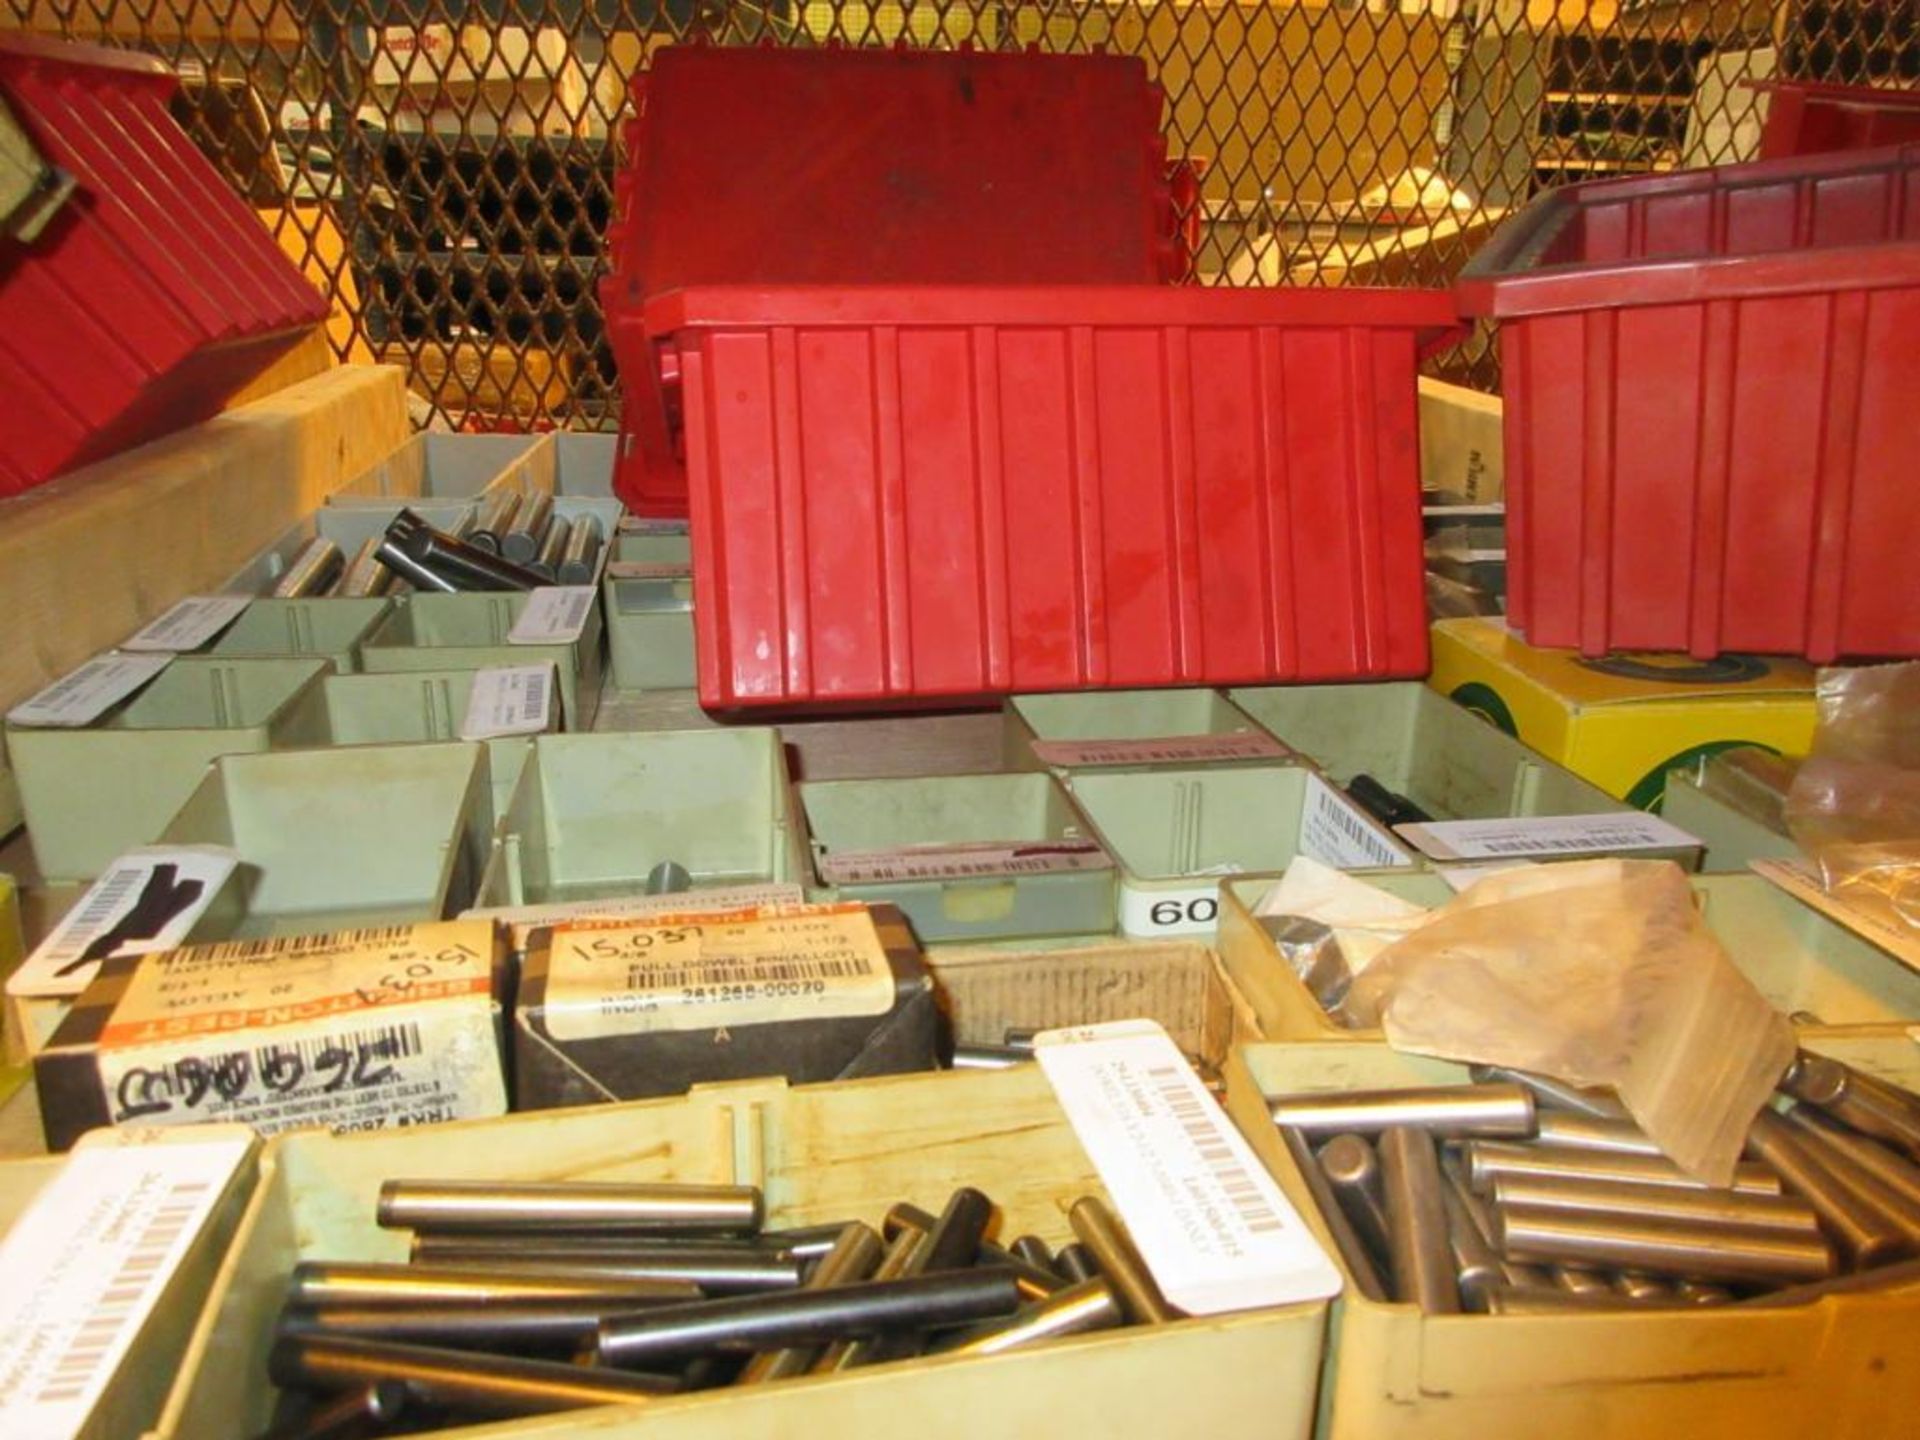 CONTENTS OF (22) SECTIONS PALLET RACK: ASSORTED ABRASIVES, SUNNEN STONES, TOOL BITS, DOVETAIL CUTTER - Image 42 of 43